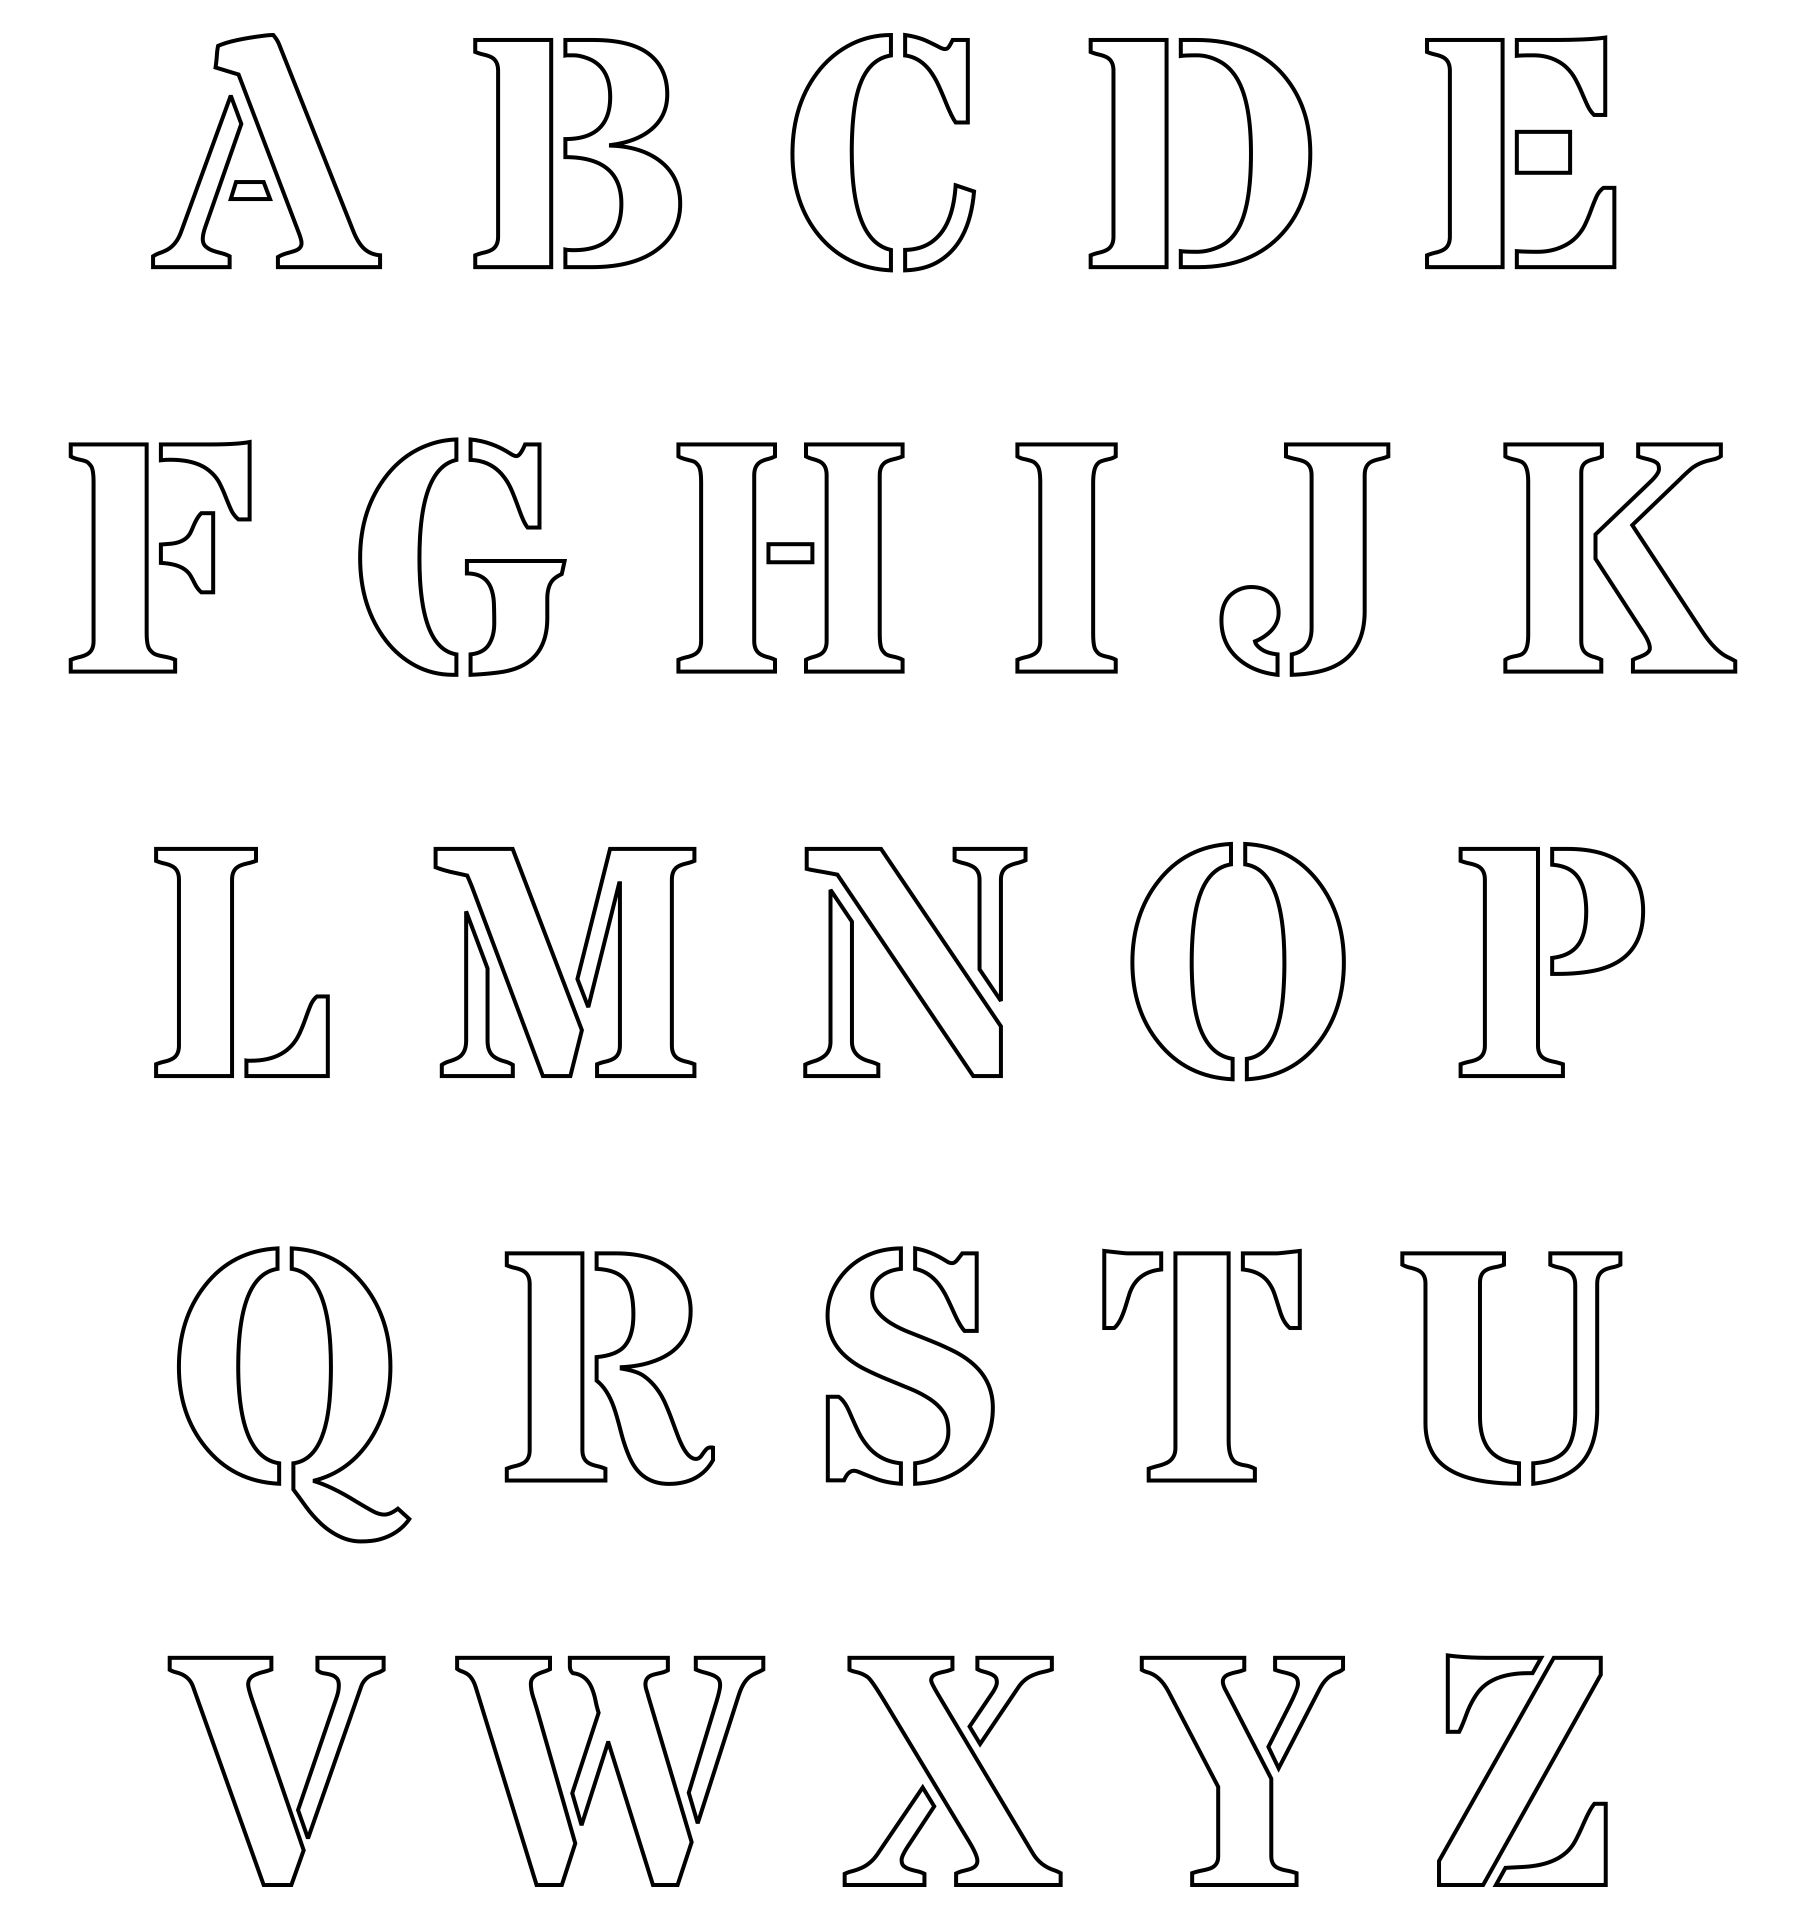 6-best-images-of-printable-cut-out-letters-free-cut-out-letters-stencils-letter-stencils-to